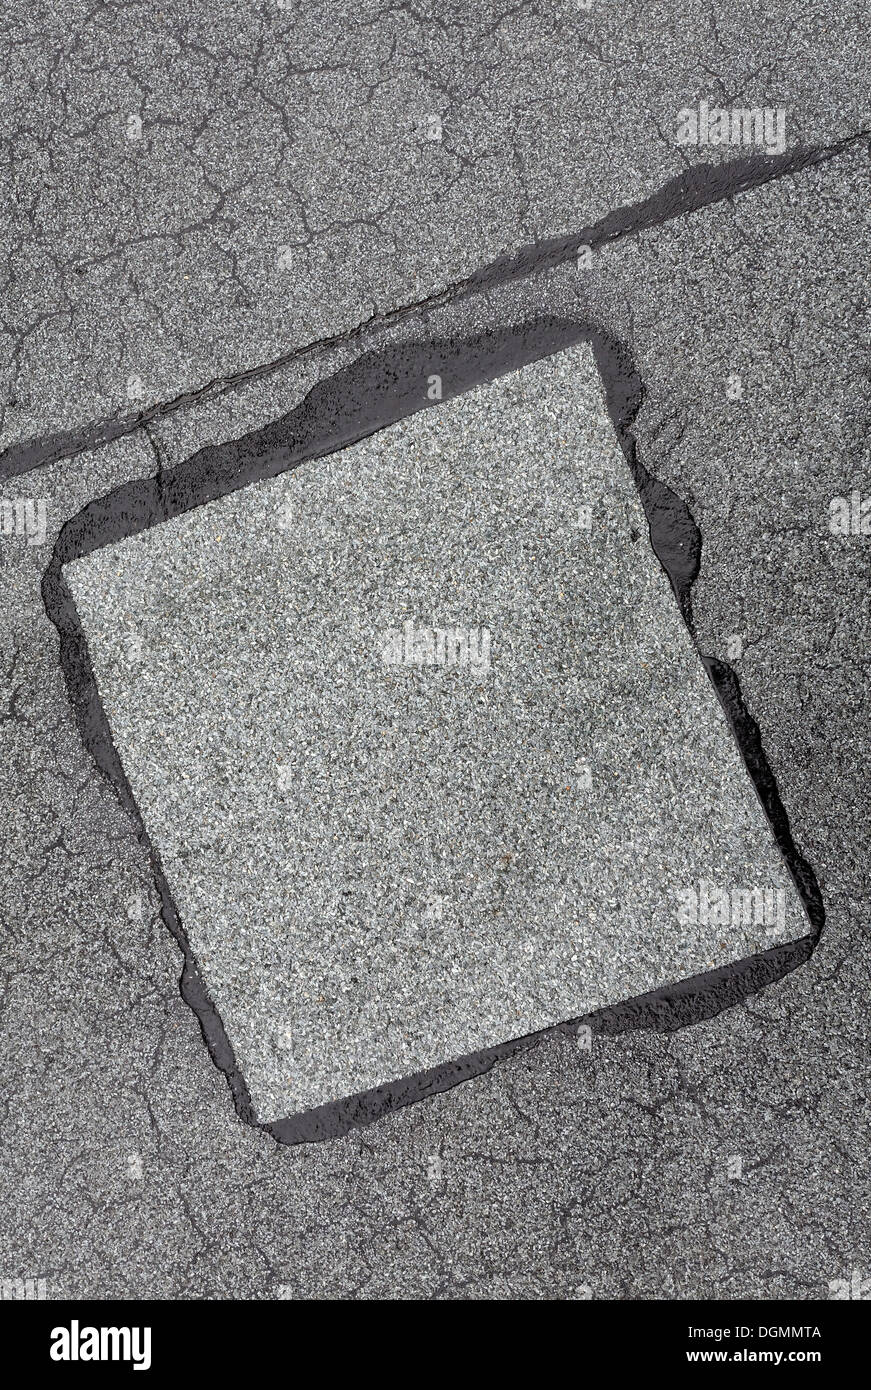 Patched-up, repaired area on a roof made of roofing felt Stock Photo